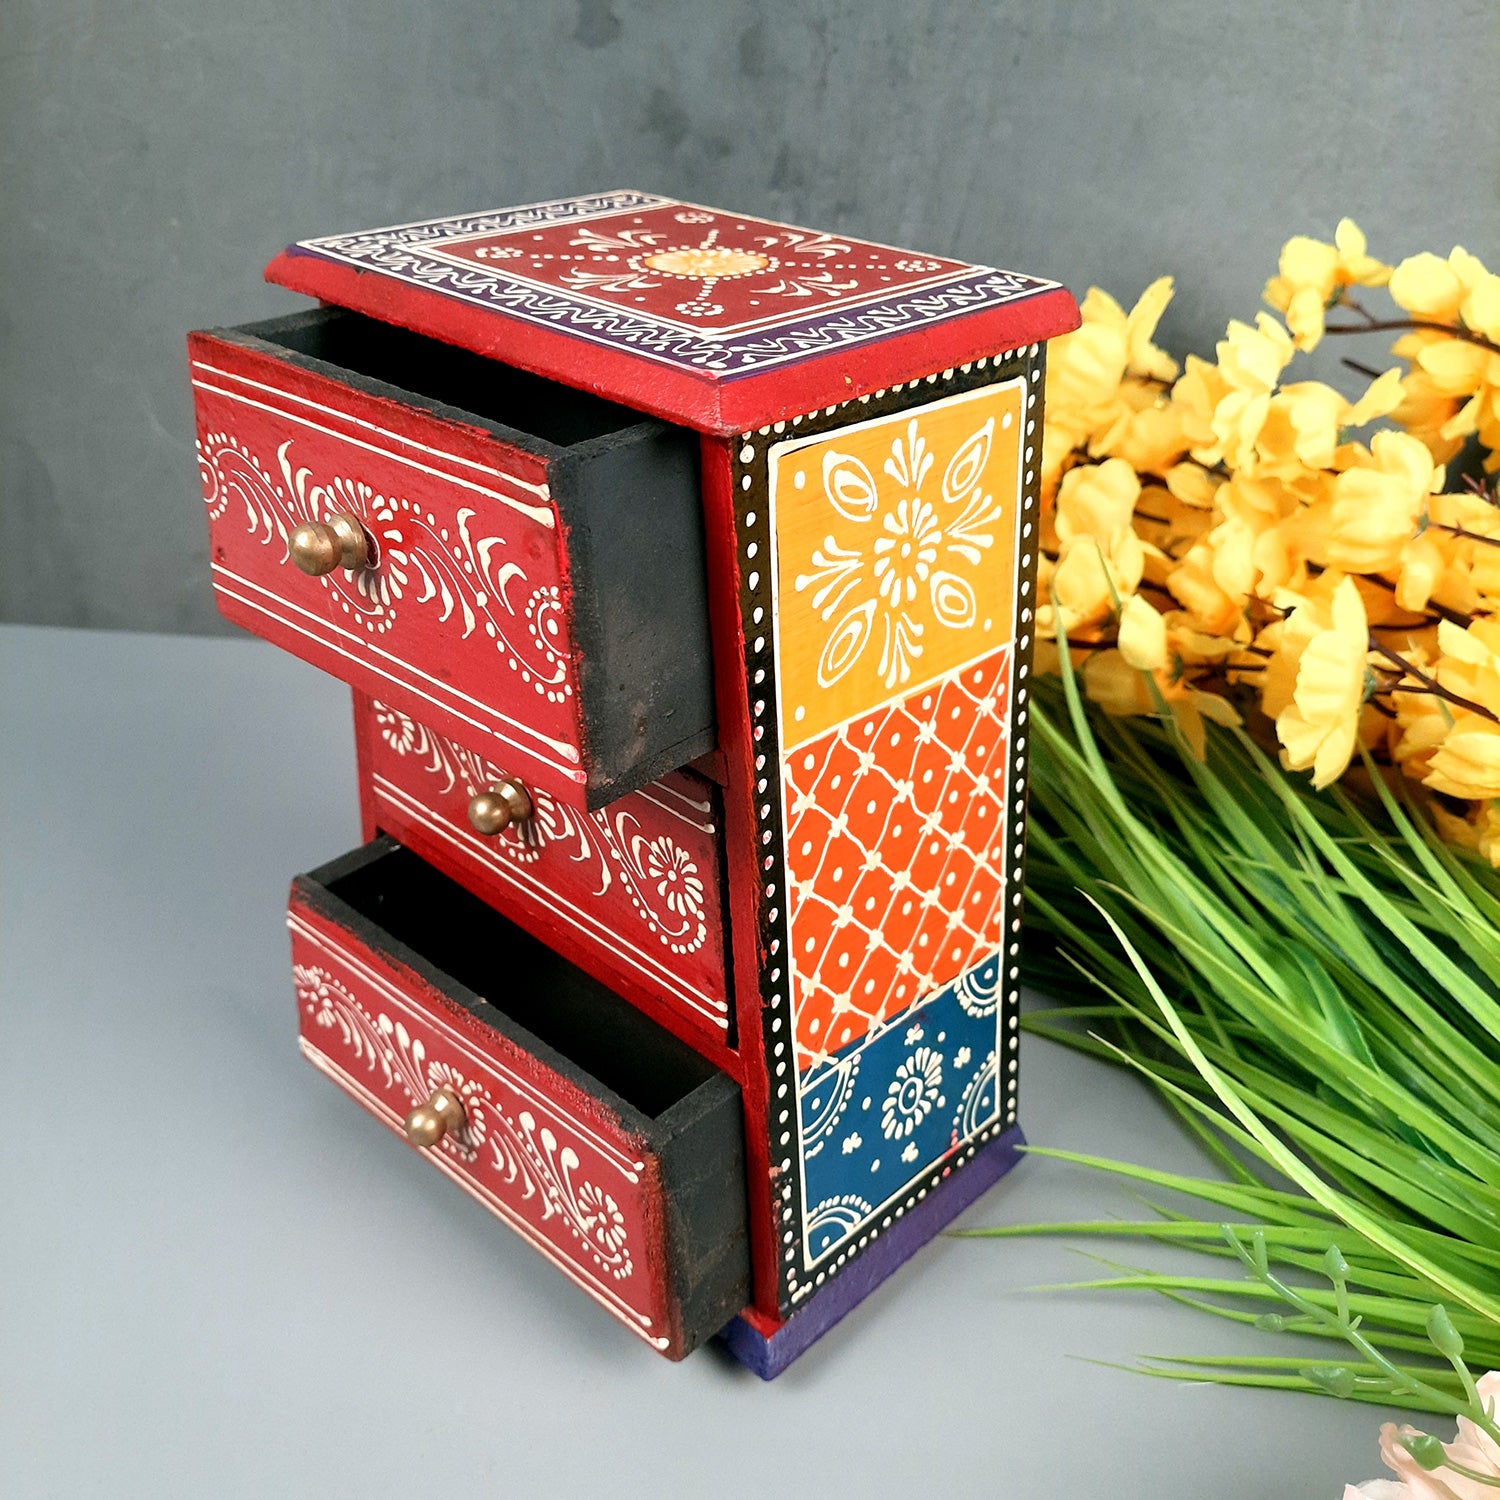 Jewellery Box | Decorative Wooden Jewelry Box - For Earring, Necklace & Gifts - 8 Inch - Apkamart